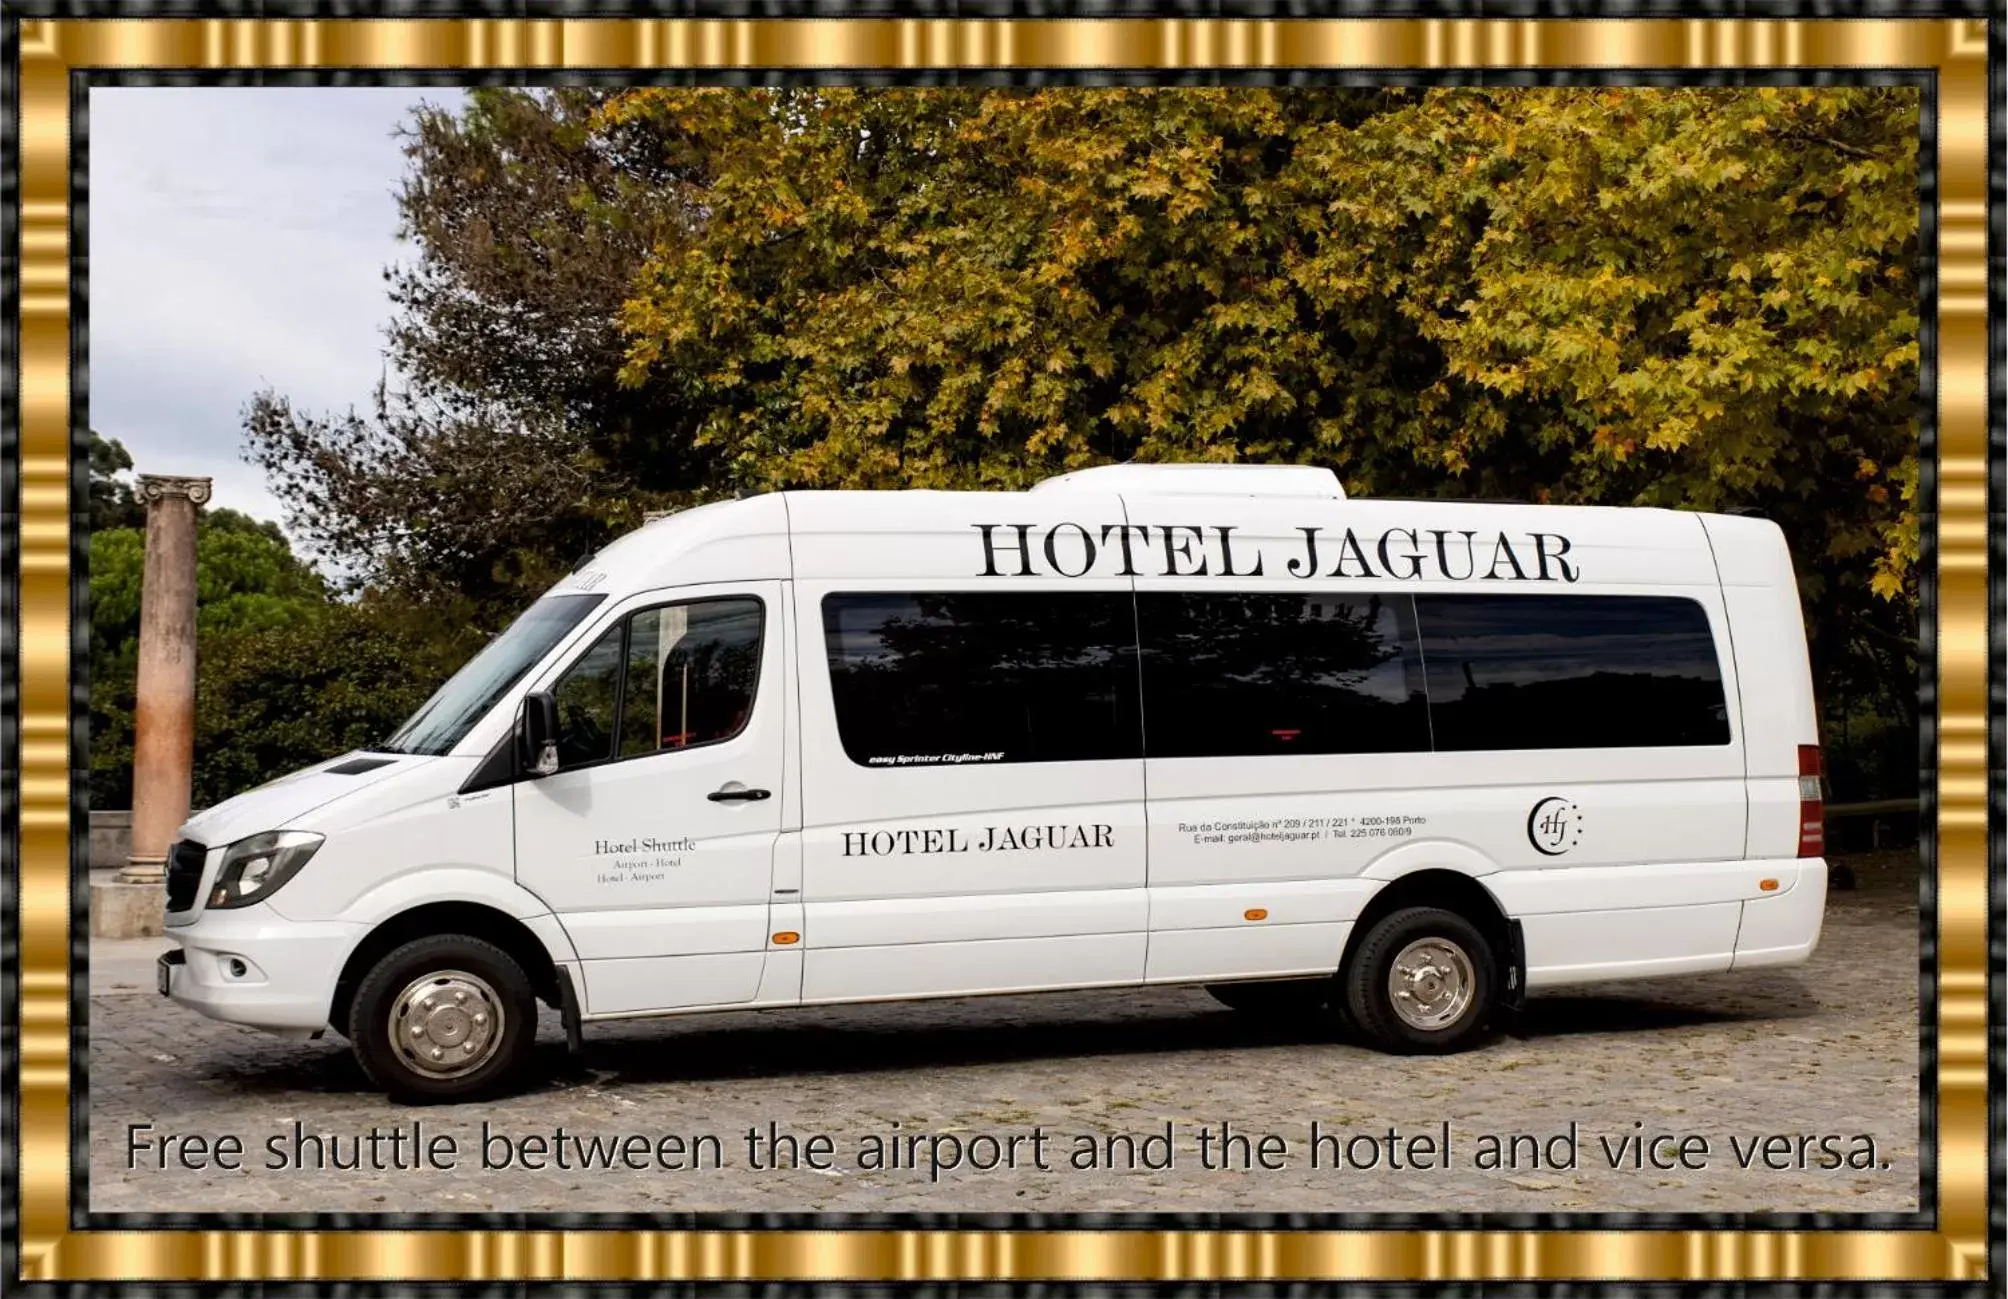 Hotel Jaguar Oporto - Airport to Hotel and City is a free Shuttle Service